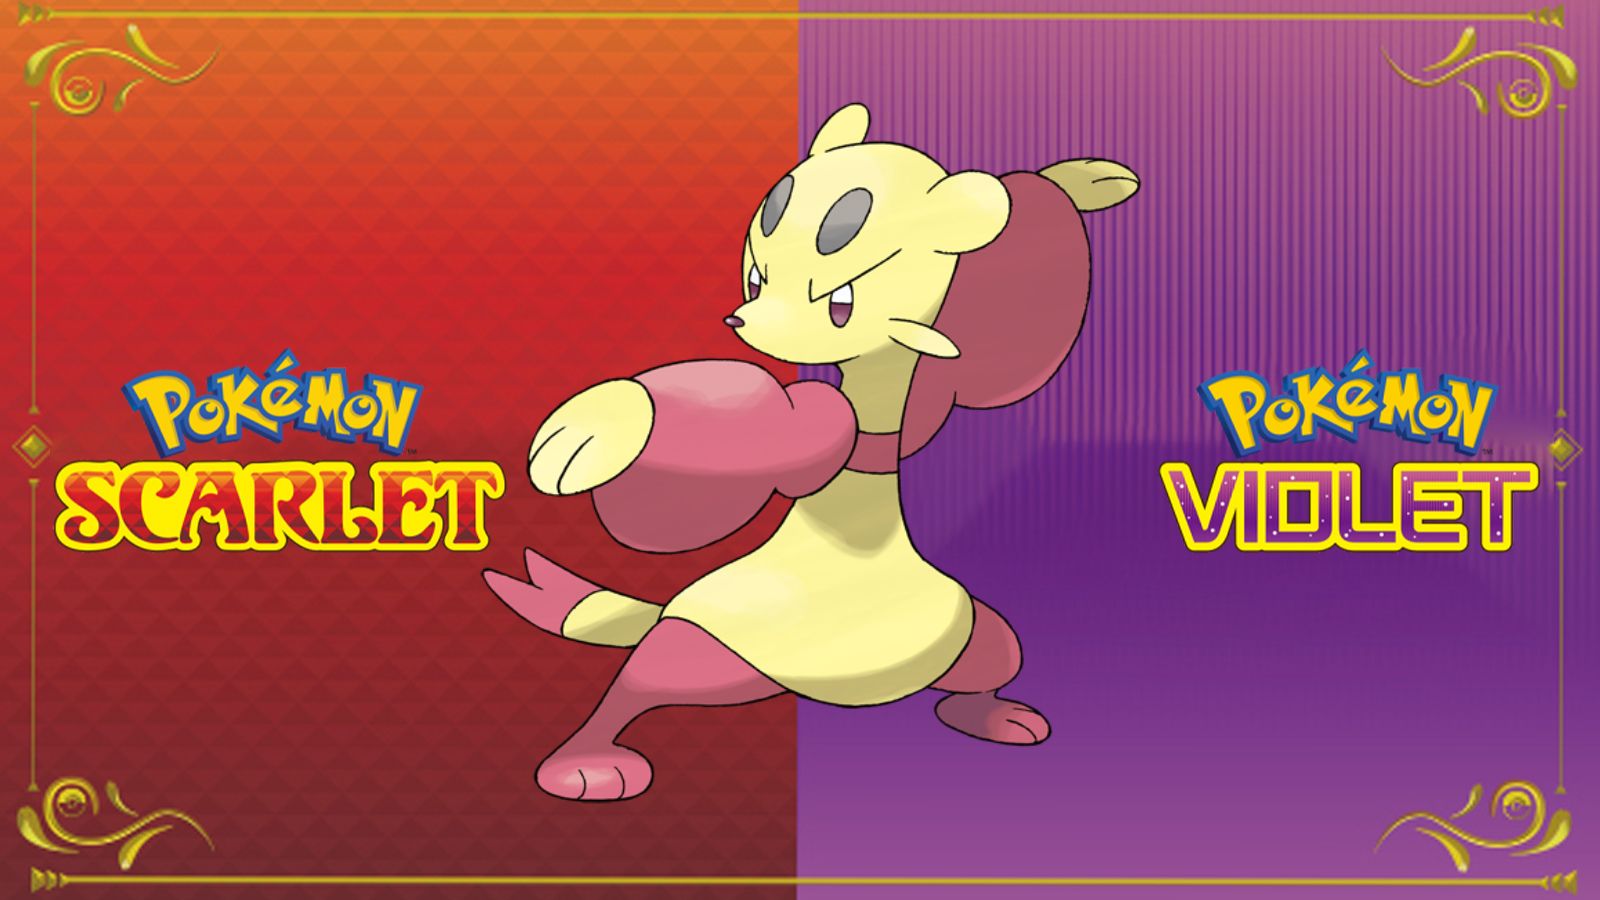 Find Mienfoo and Mienshao in Pokemon Scarlet & Violet’s Teal Mask DLC: Guide to Locations and Evolution